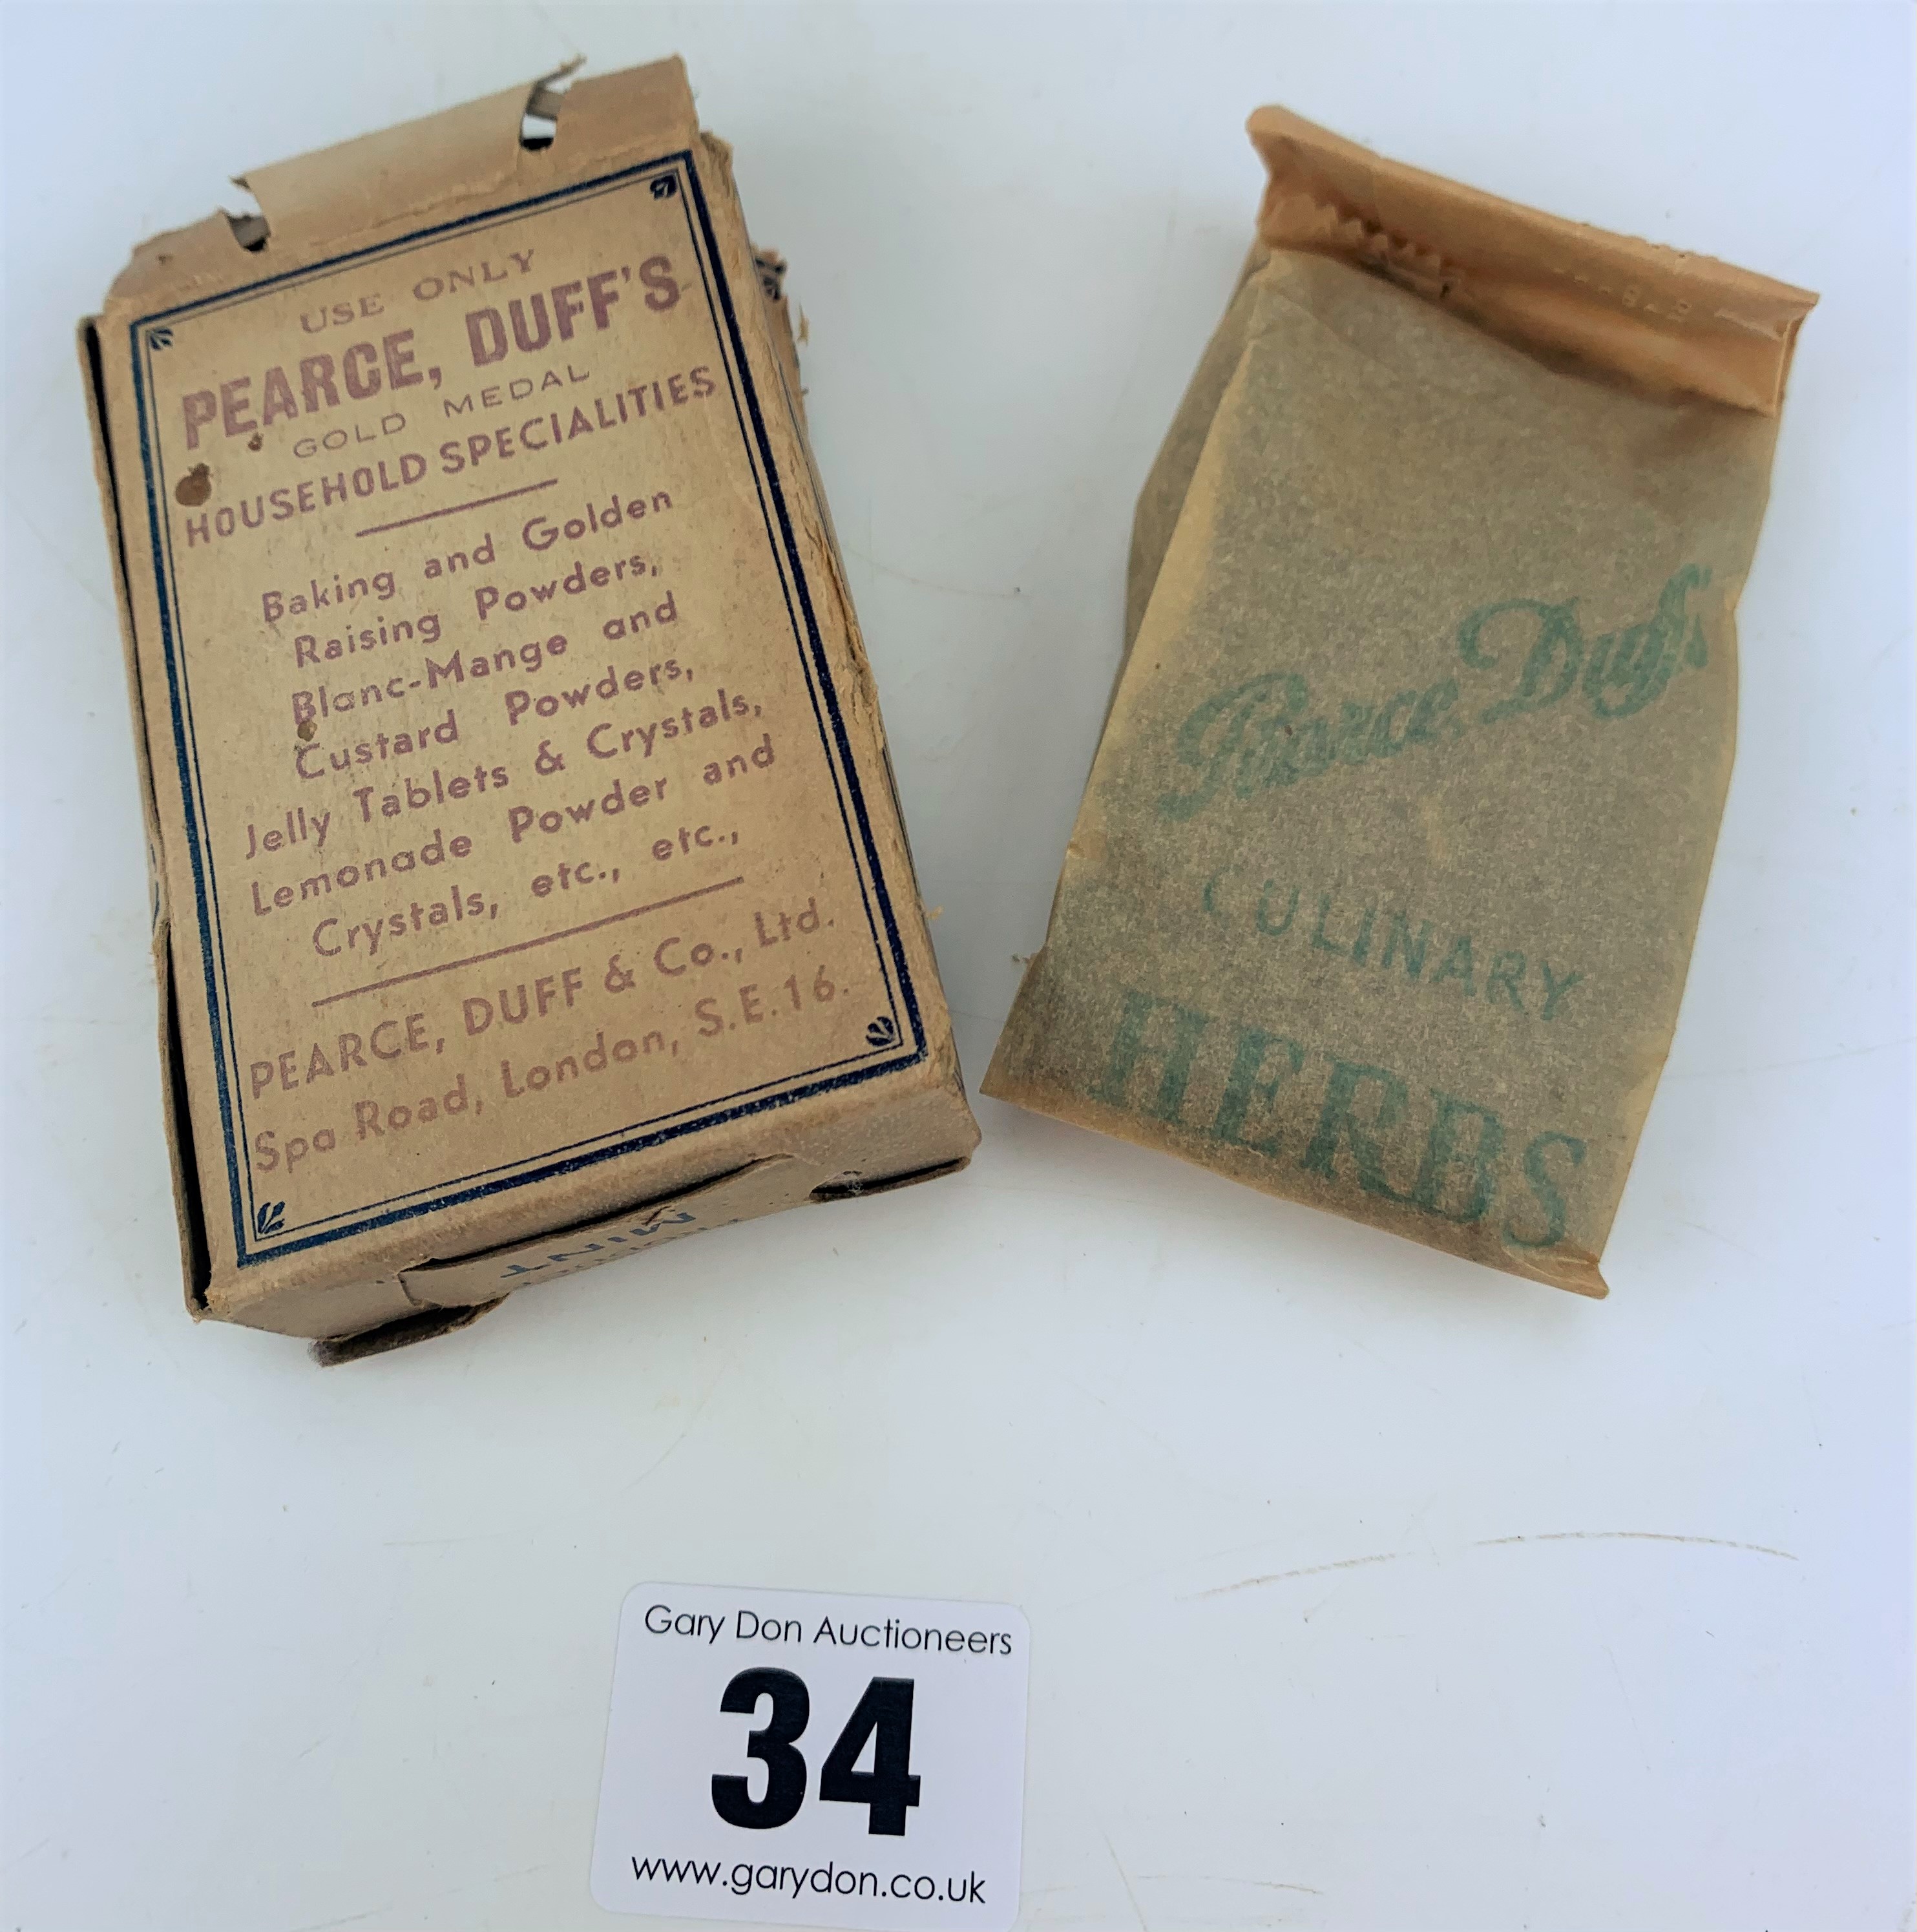 Wooden potato masher and Pearce Duffs herb packet - Image 5 of 5